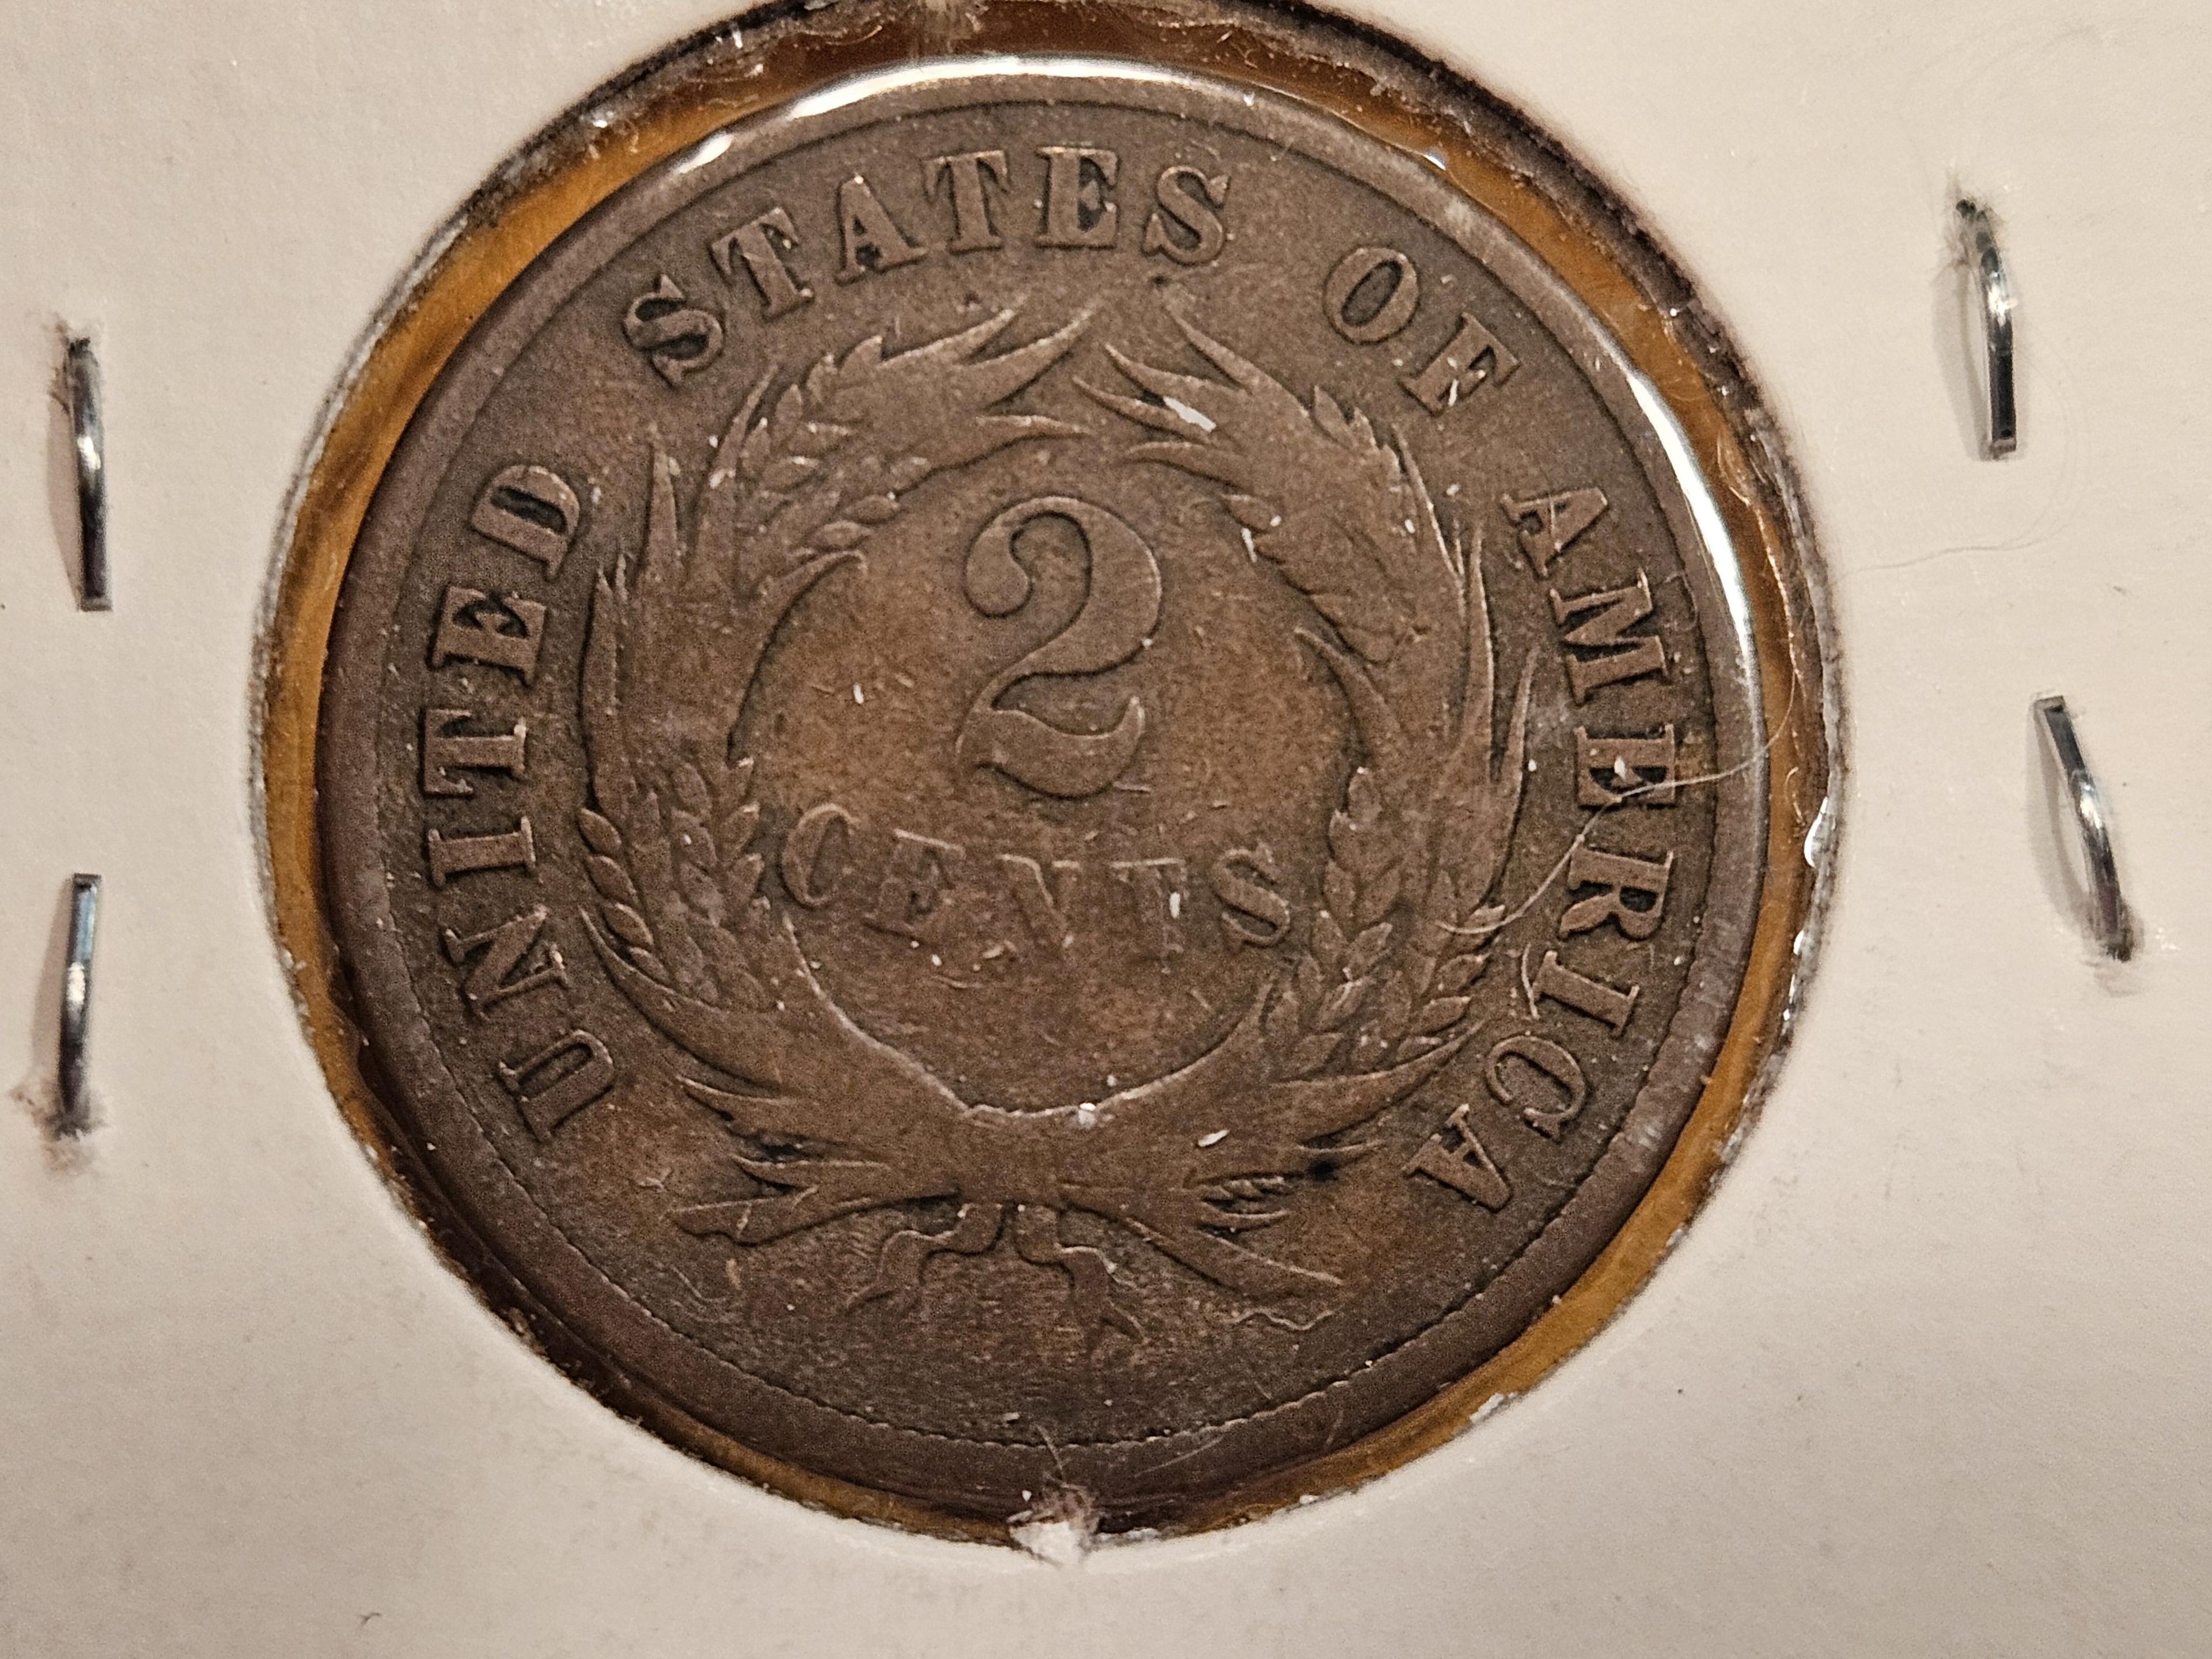 Better Date 1871 Two Cent piece